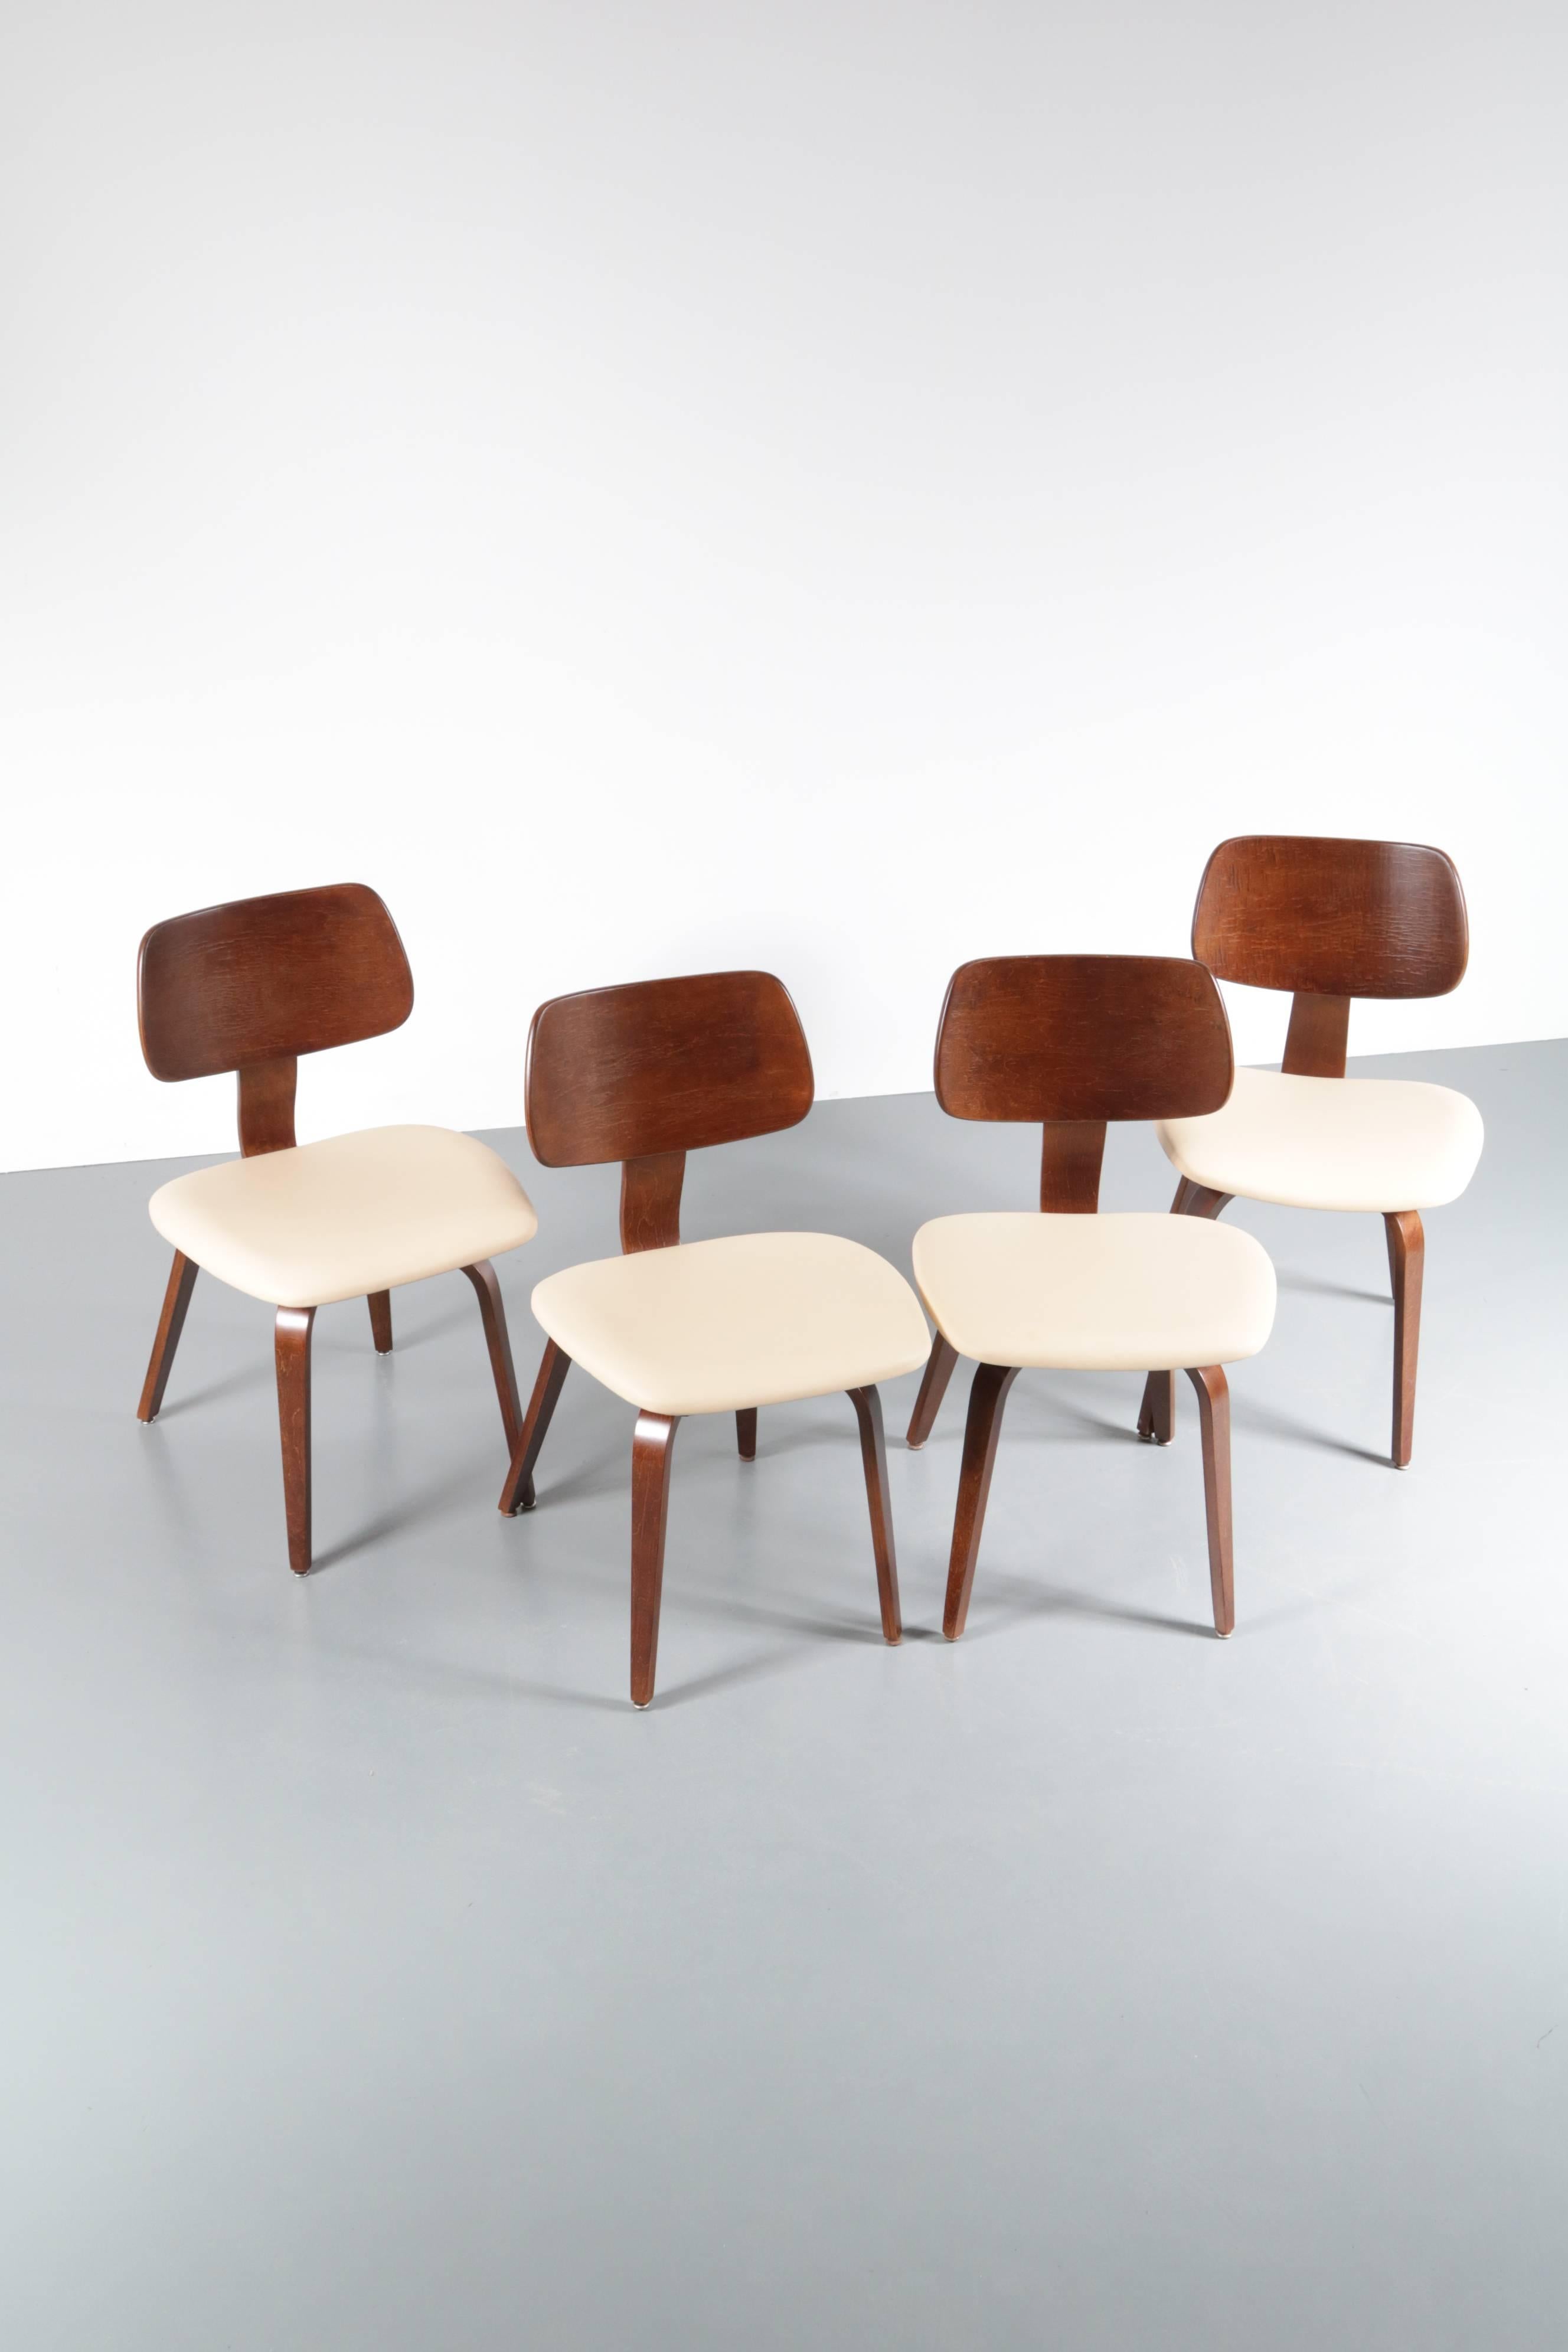 Mid-Century Modern Set of Four Dining Chairs by Joe Atkinson for Thonet, USA, 1950